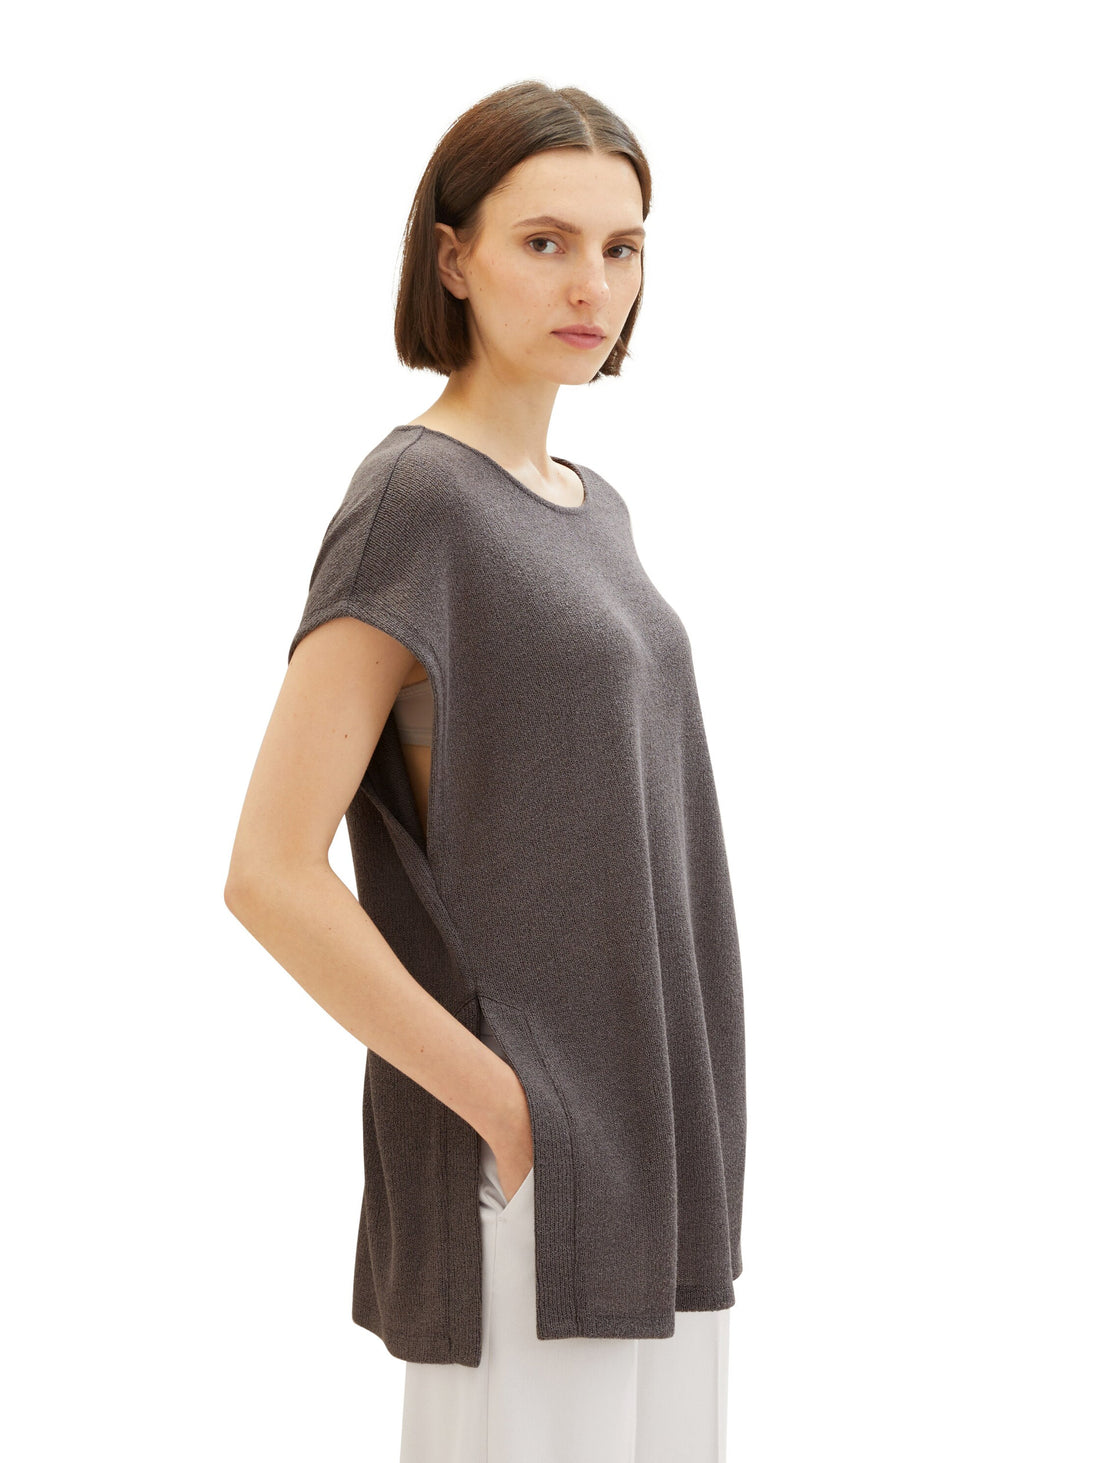 Blouse With Cap Sleeve_1038726_32251_03